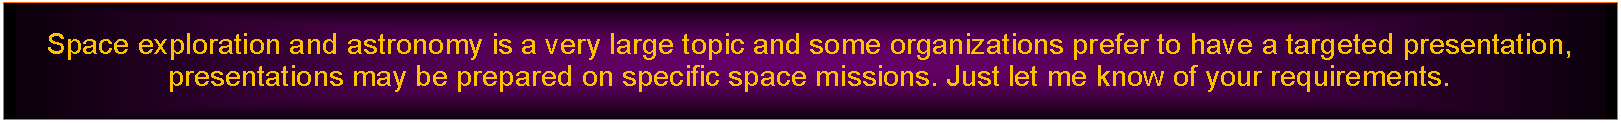 Text Box: Space exploration and astronomy is a very large topic and some organizations prefer to have a targeted presentation, presentations may be prepared on specific space missions. Just let me know of your requirements.